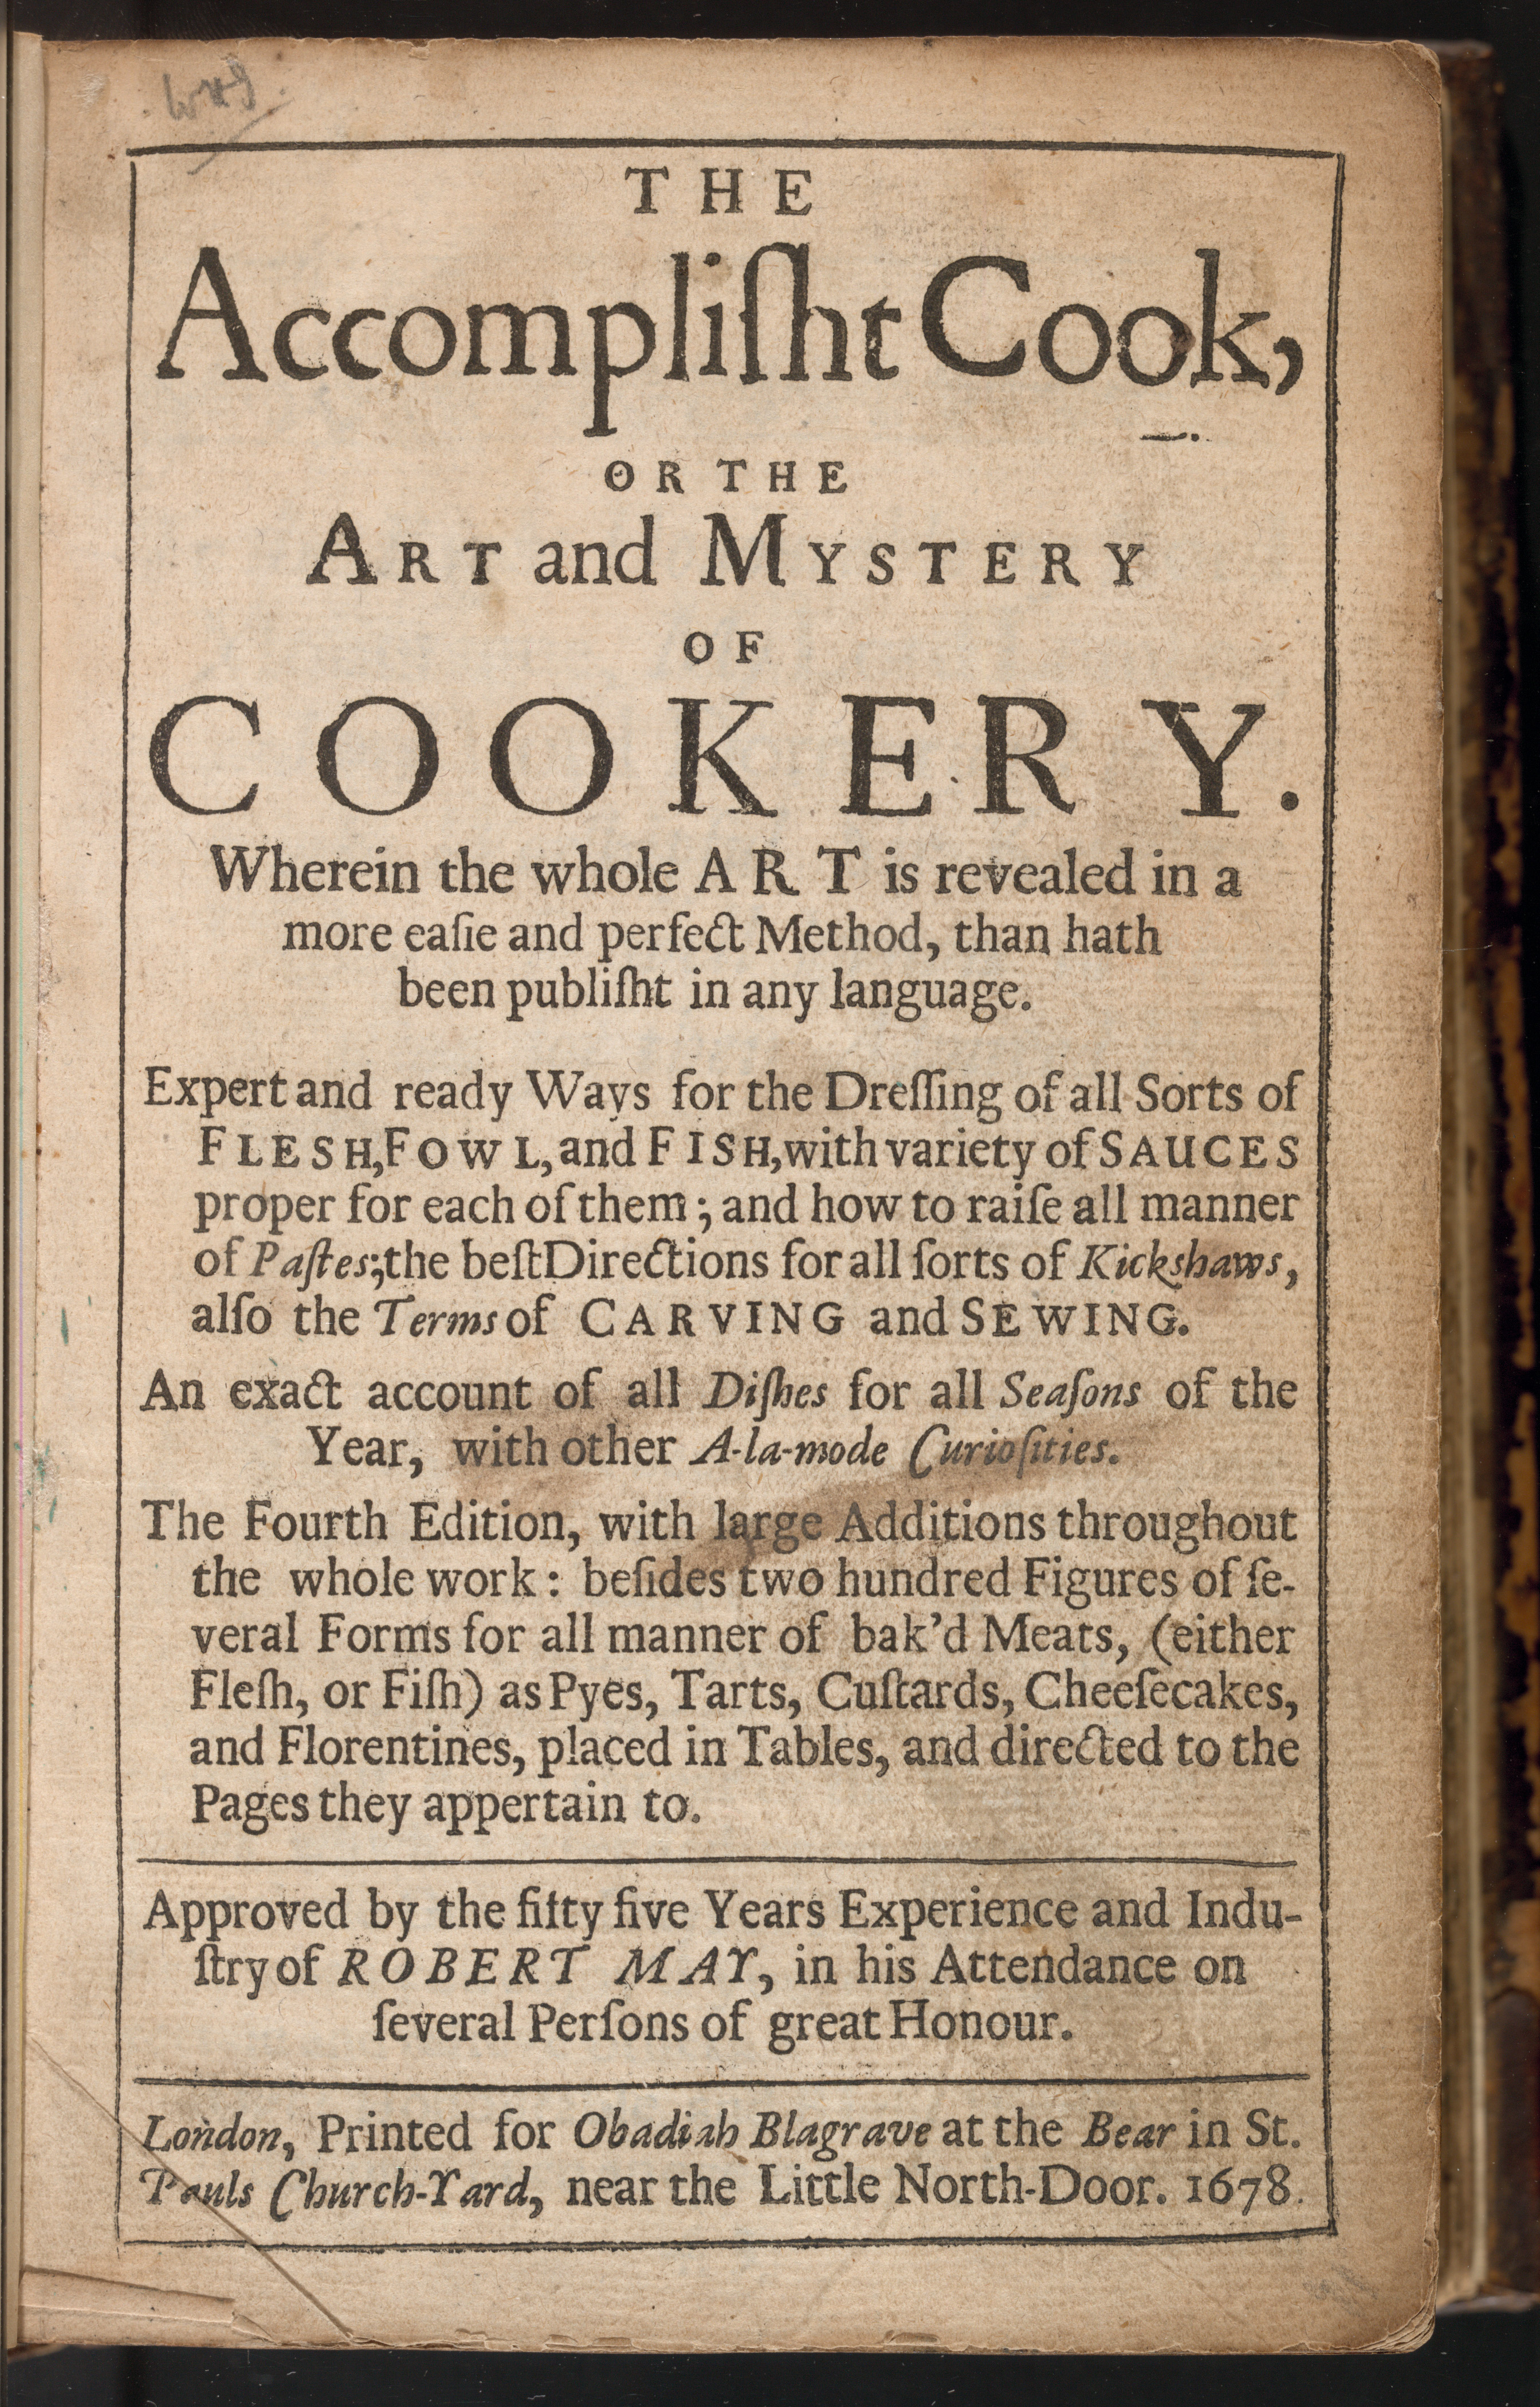 Title page of The Accomplisht Cook, or the Art and Mystery of Cookery. 